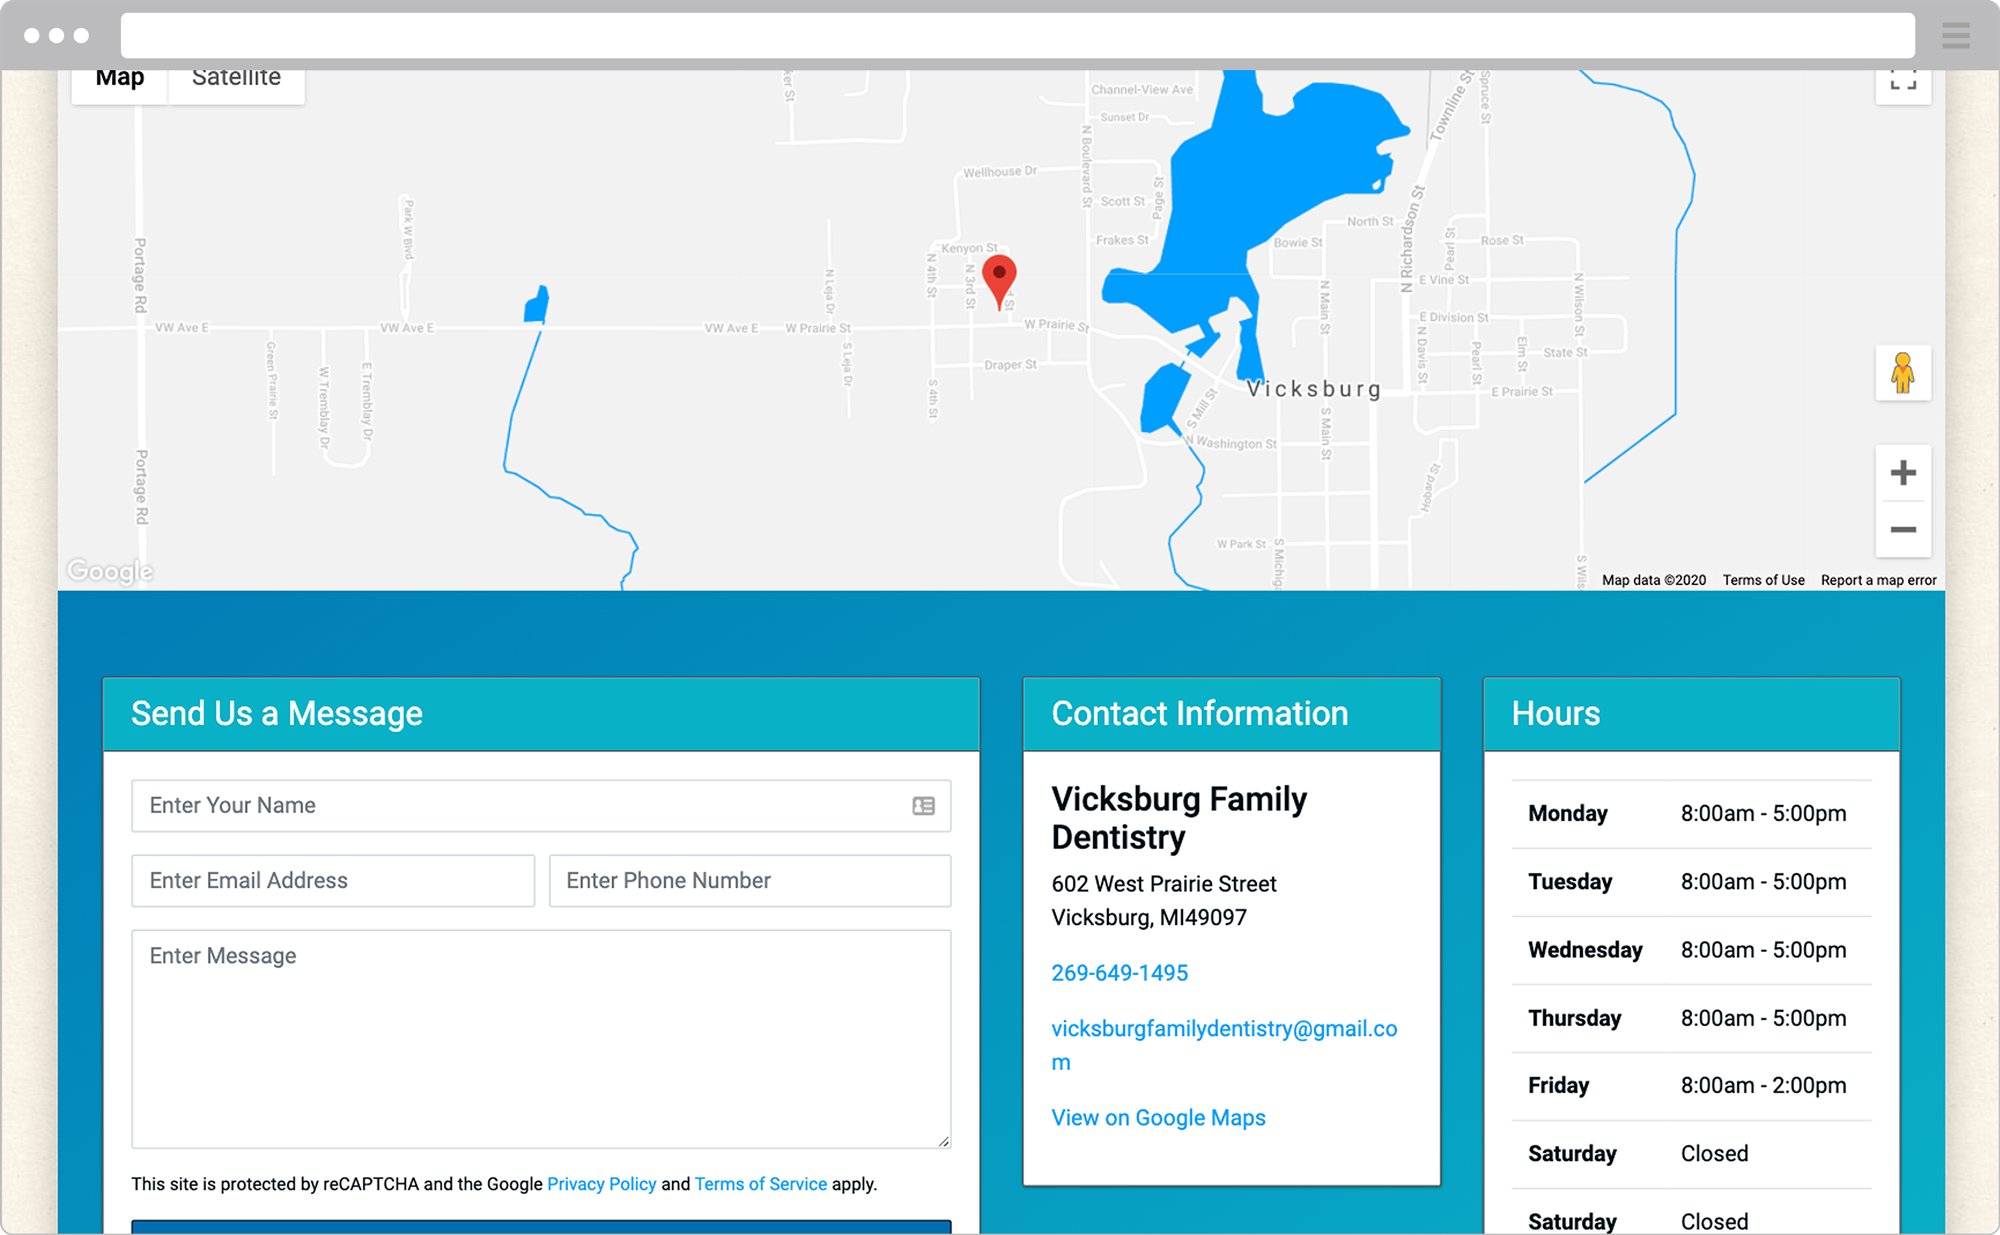 Vicksburg Family Dentistry Website Contact Section